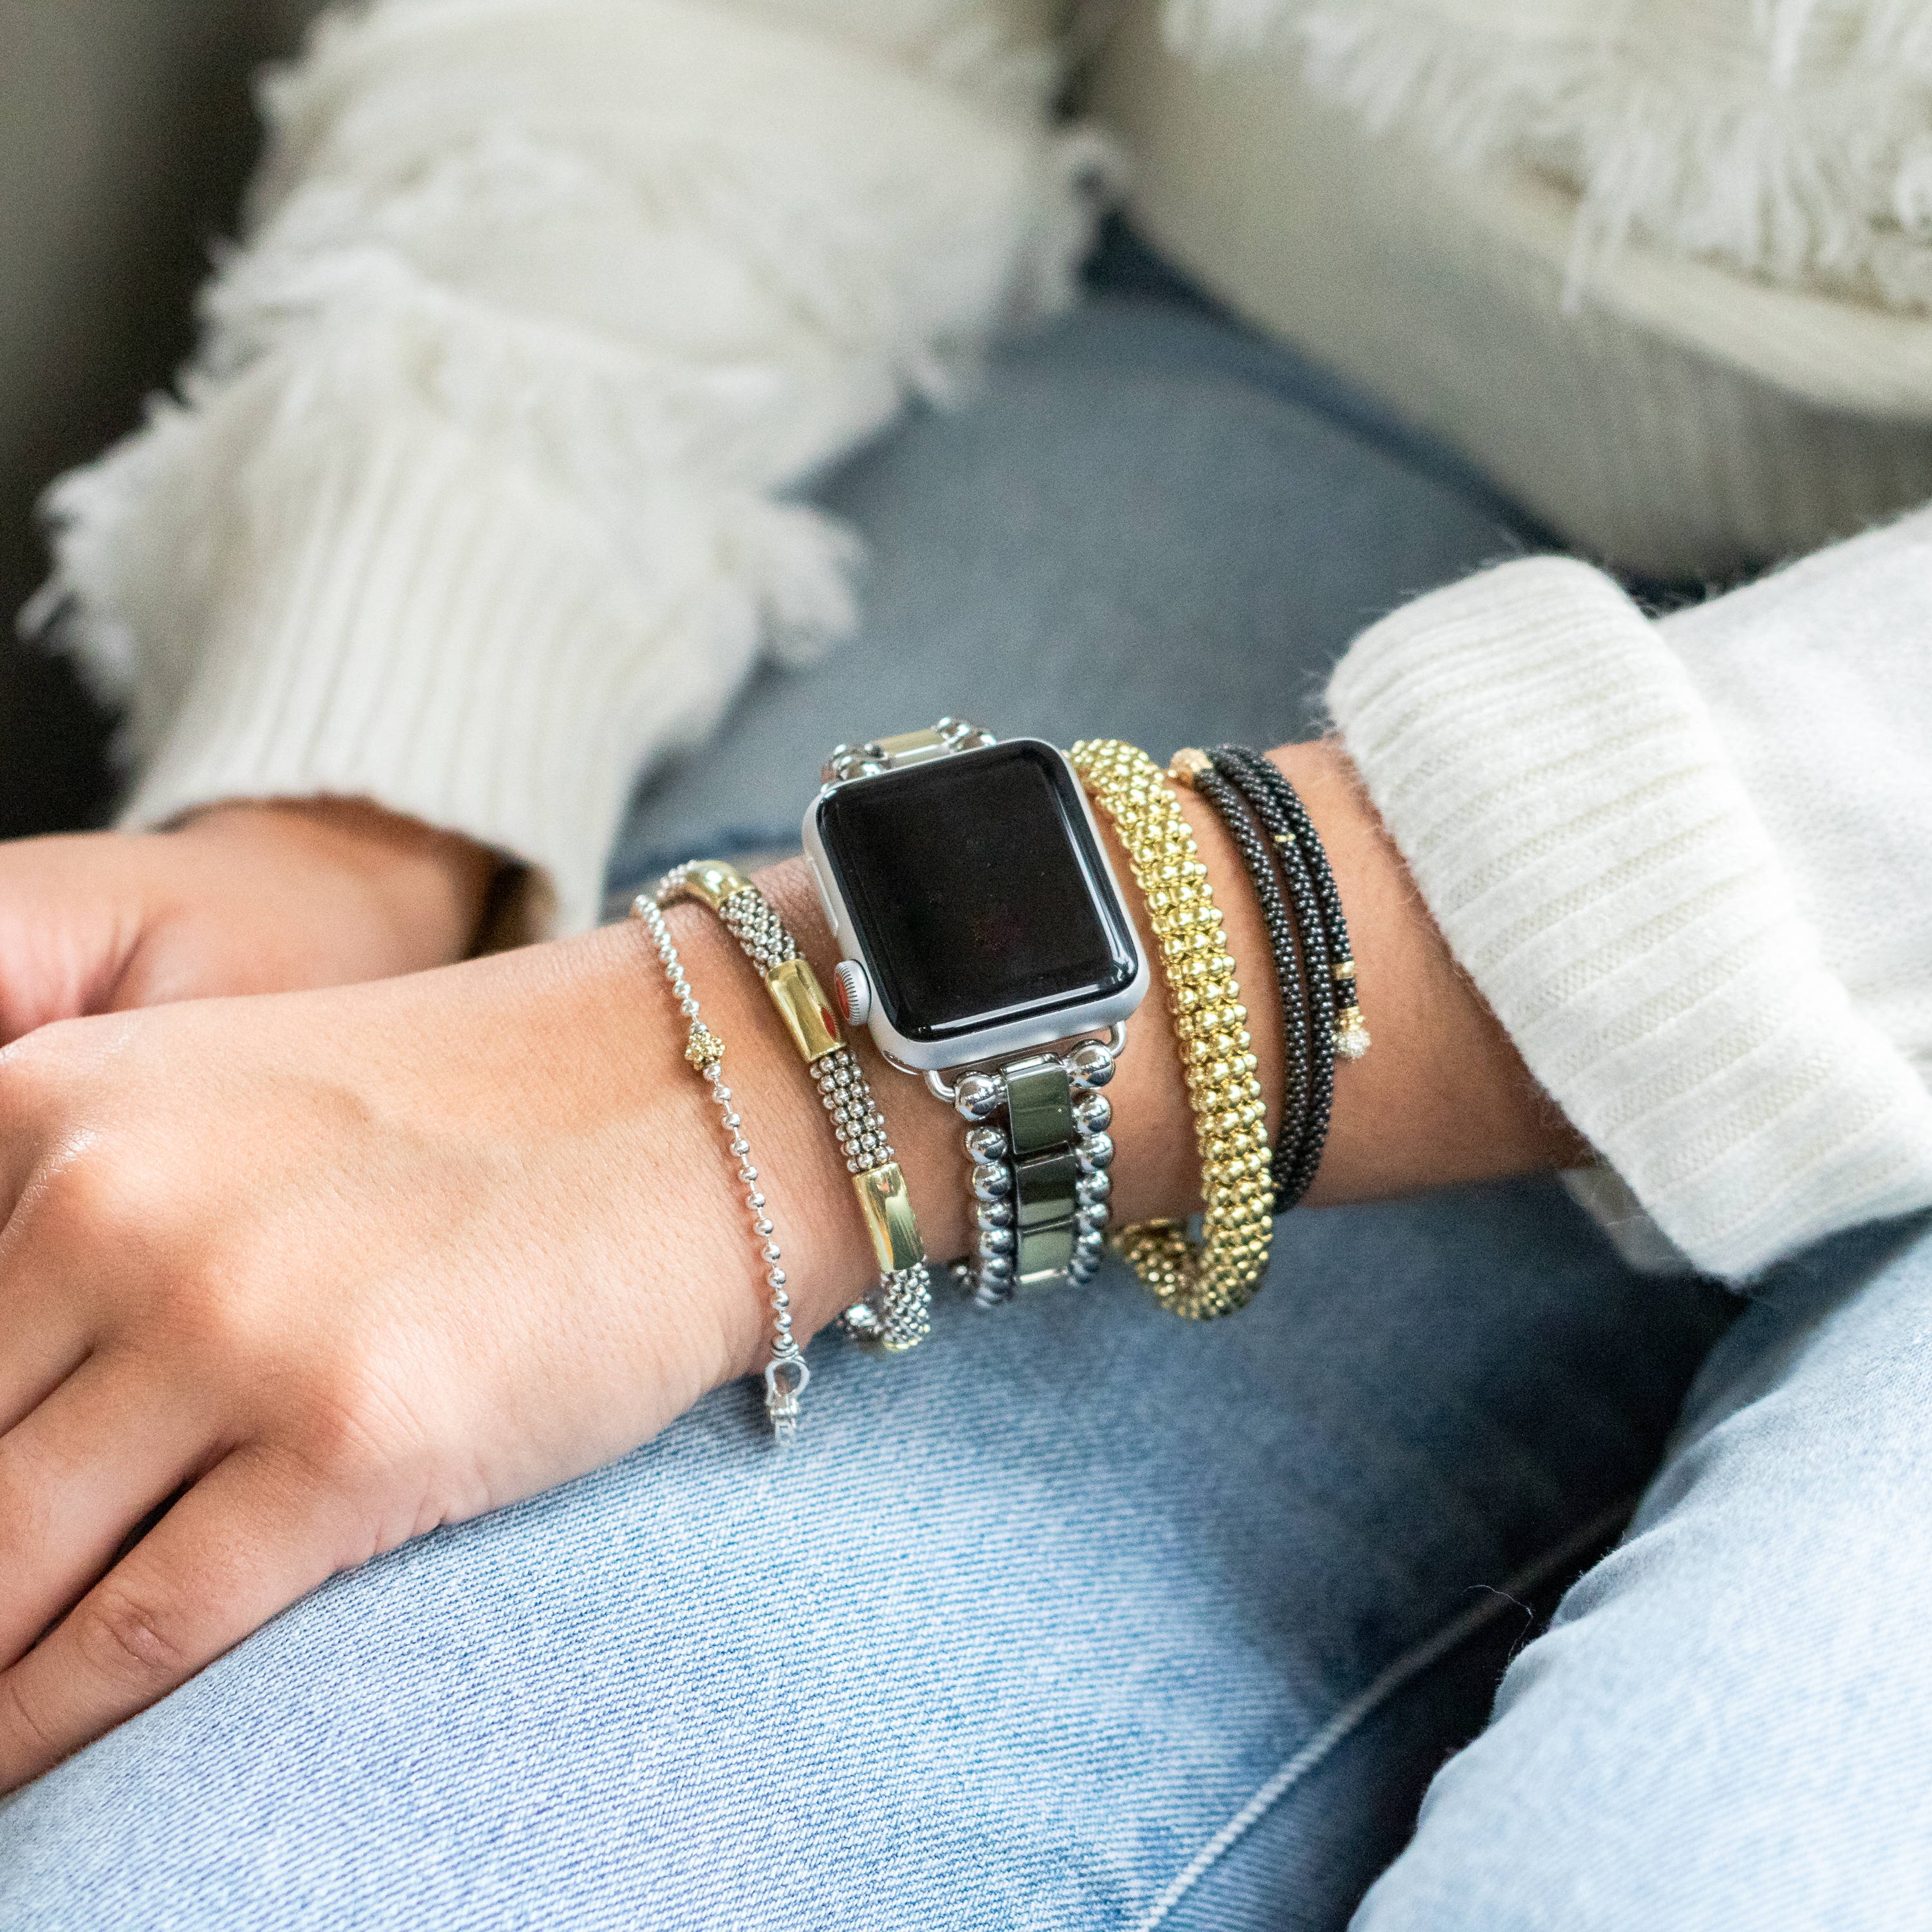 Lagos Bracelets and Apple Watch